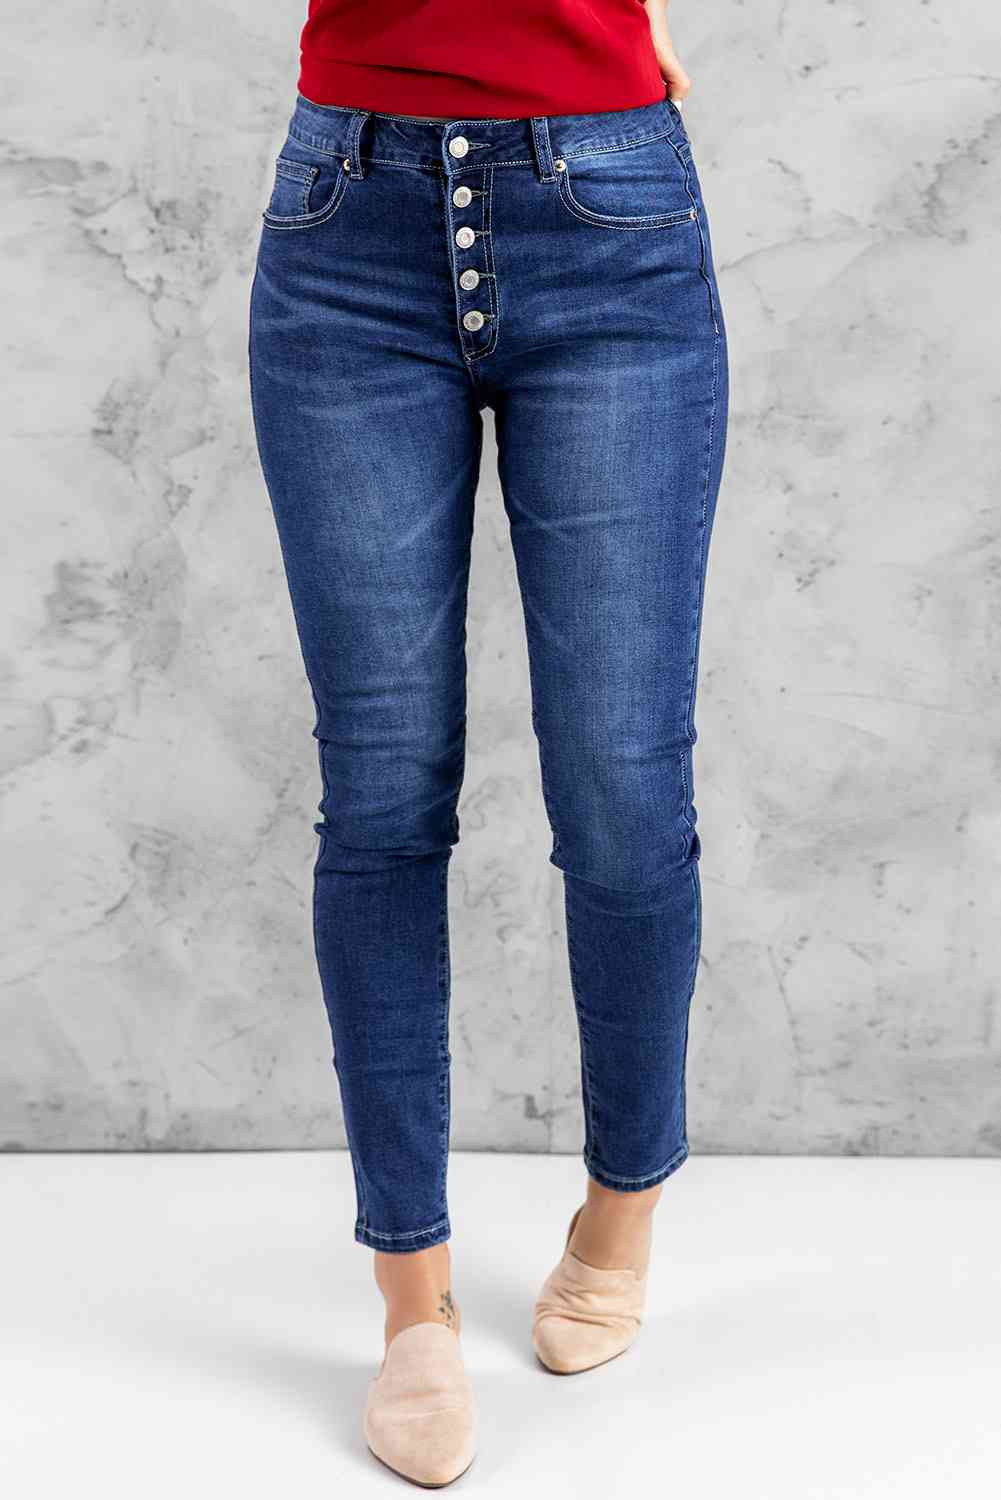 Baeful What You Want Button Fly Pocket Jeans